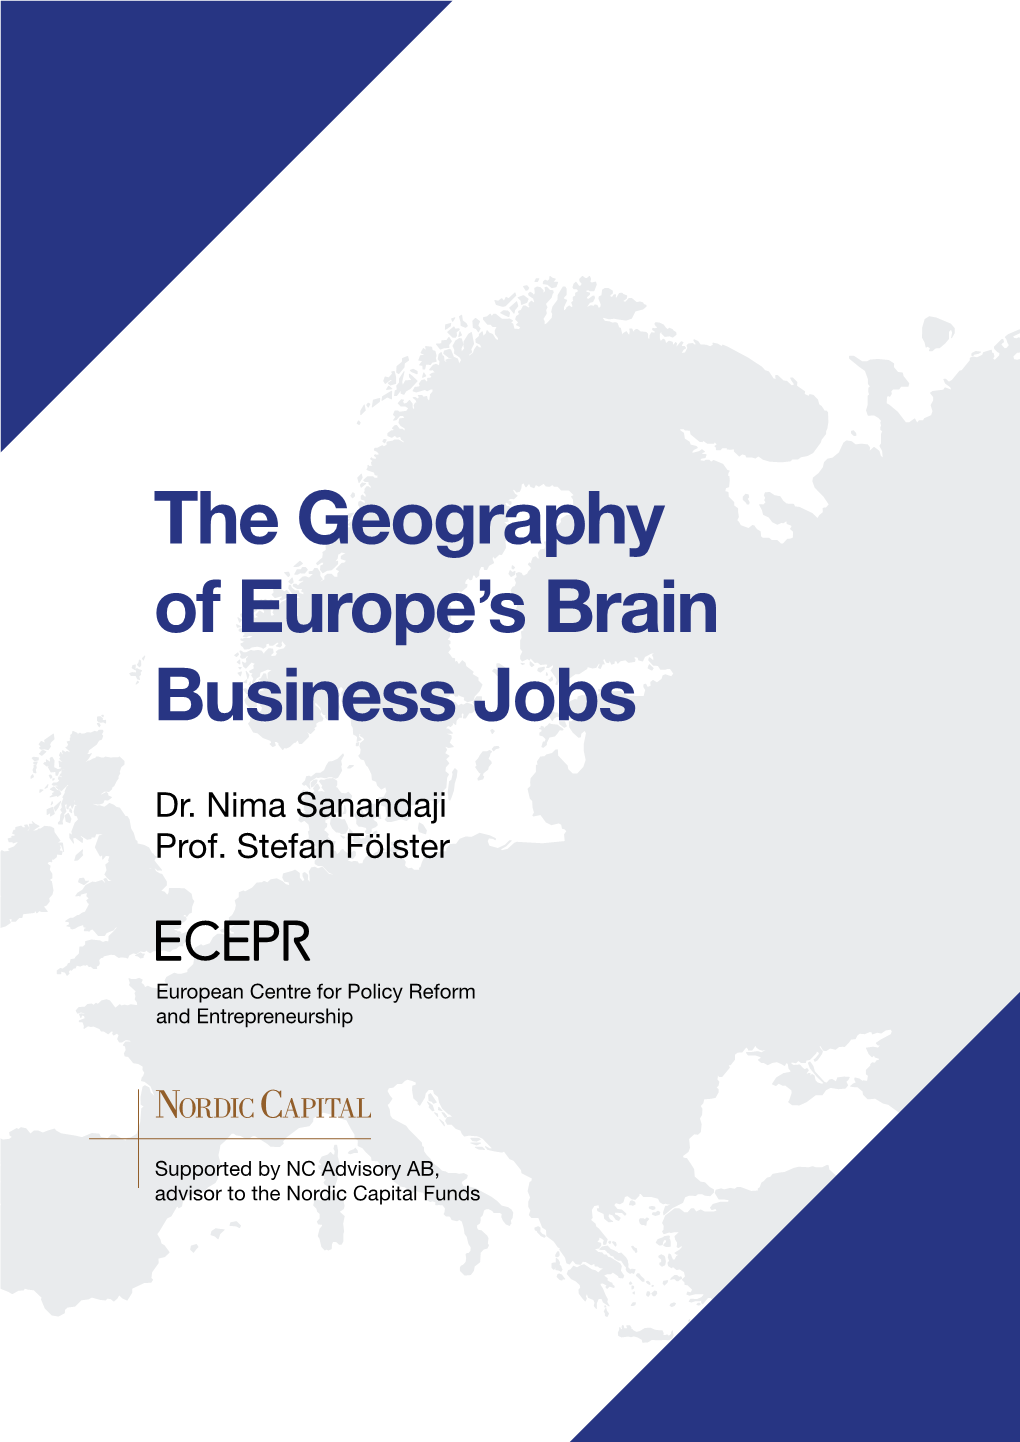 The Geography of Europe's Brain Business Jobs